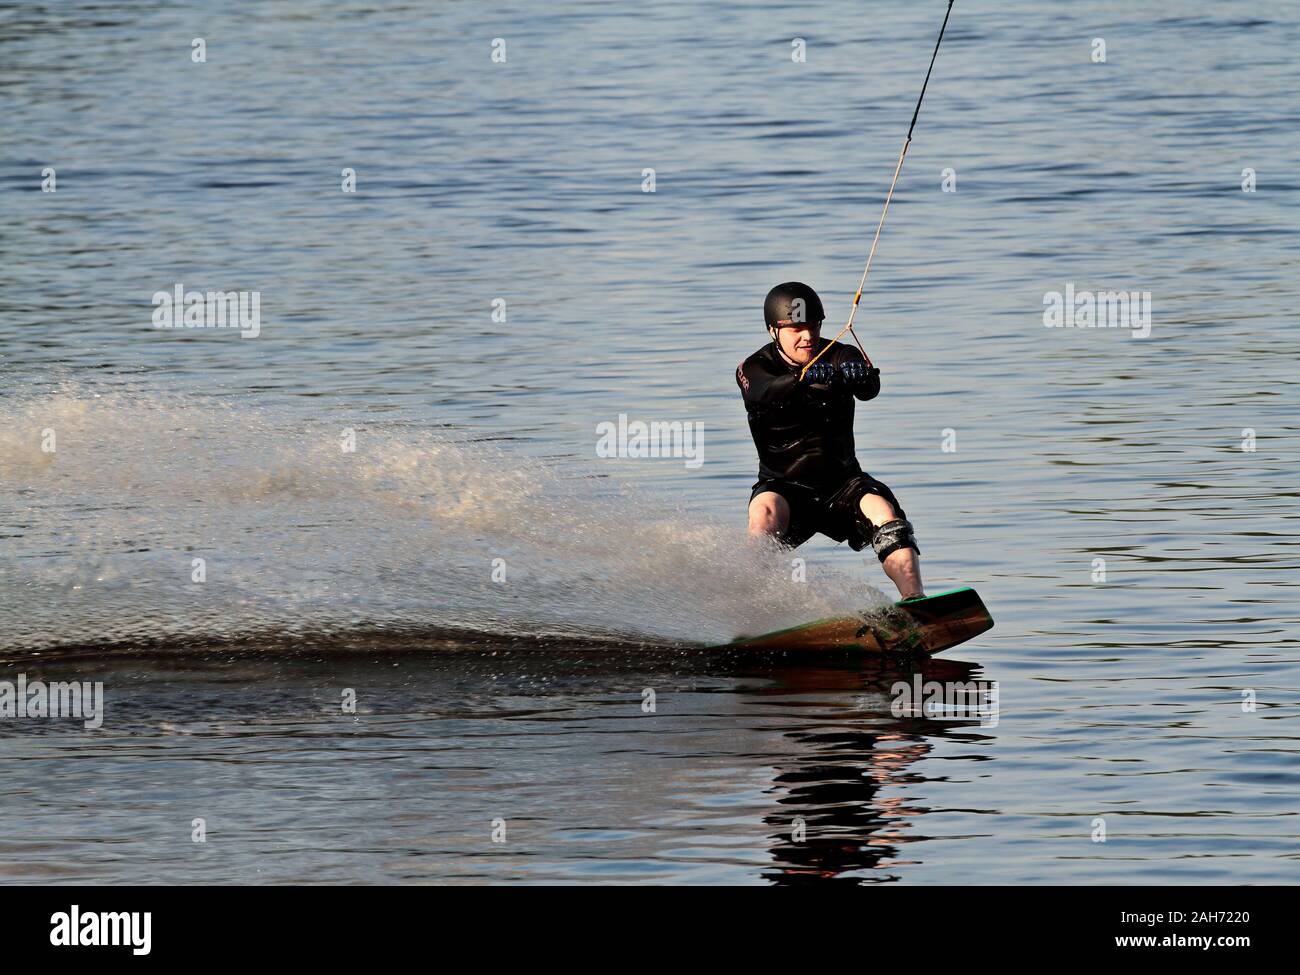 Hämeenlinna Finland 05/31/2016 A young wet man wake boarding on a lake in summertime Stock Photo